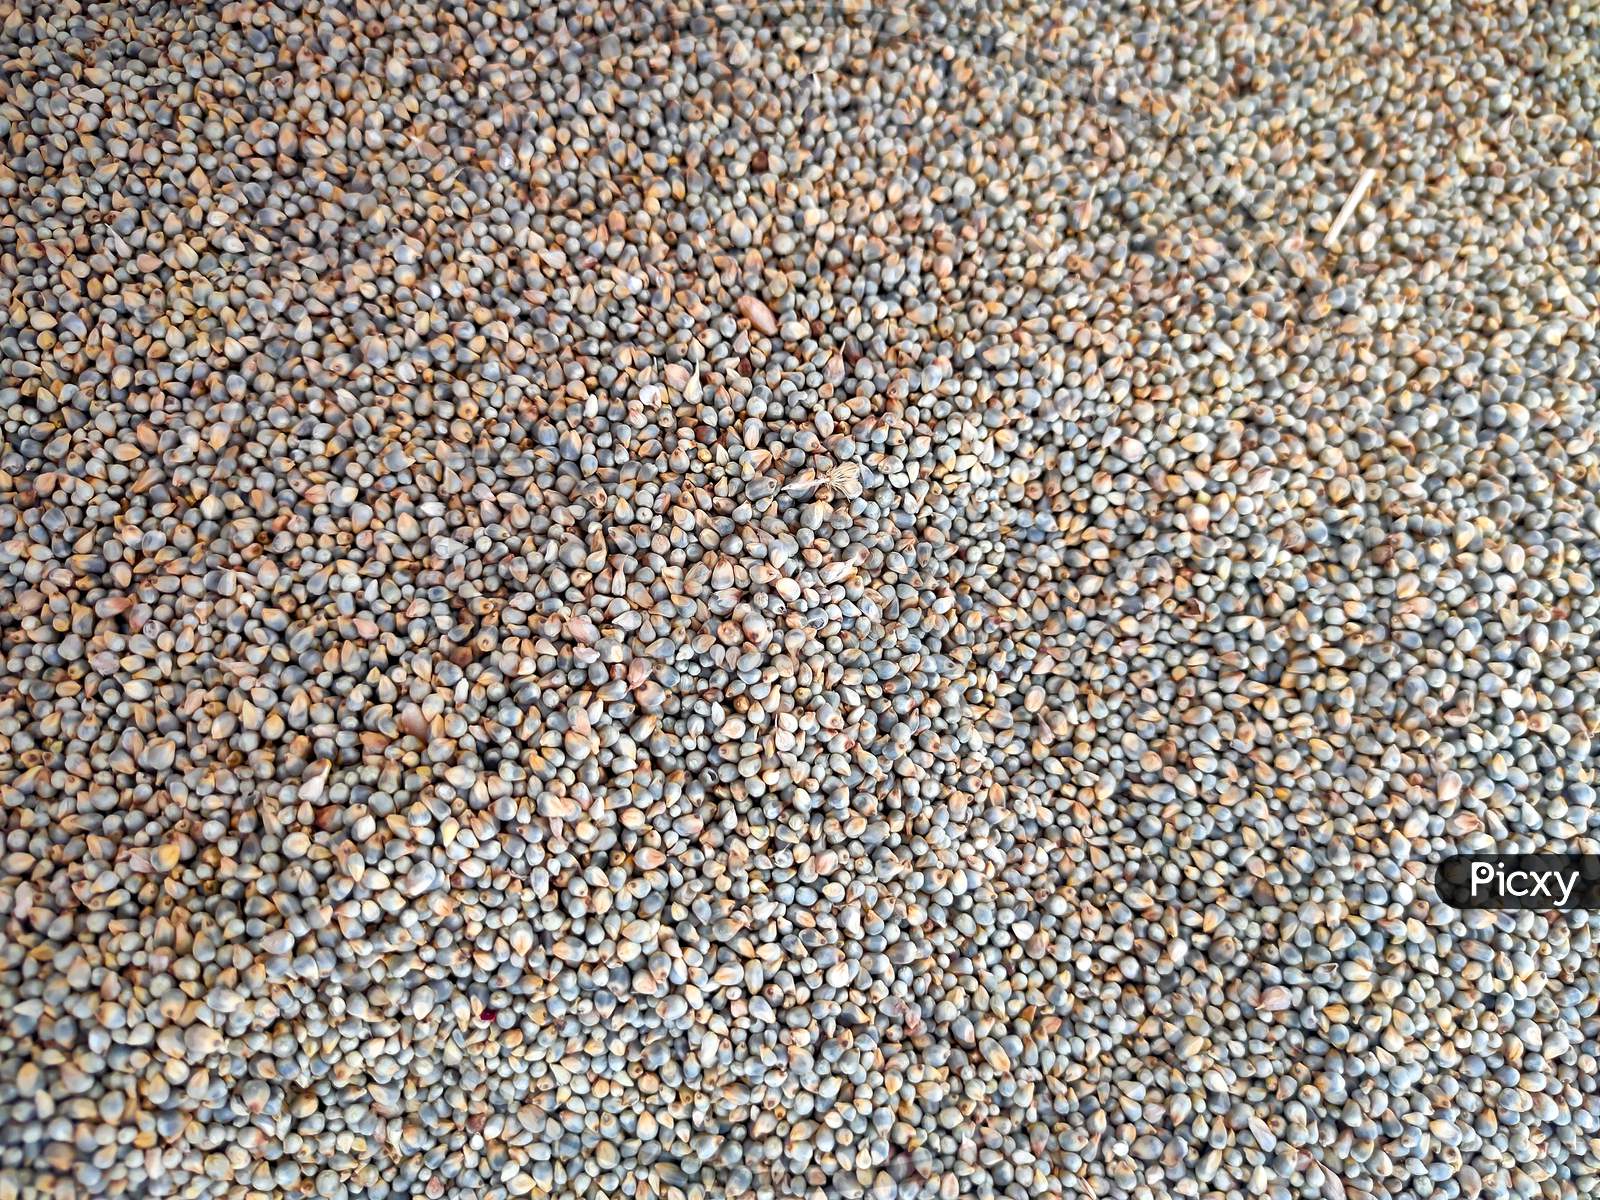 expanded millet seeds texture.